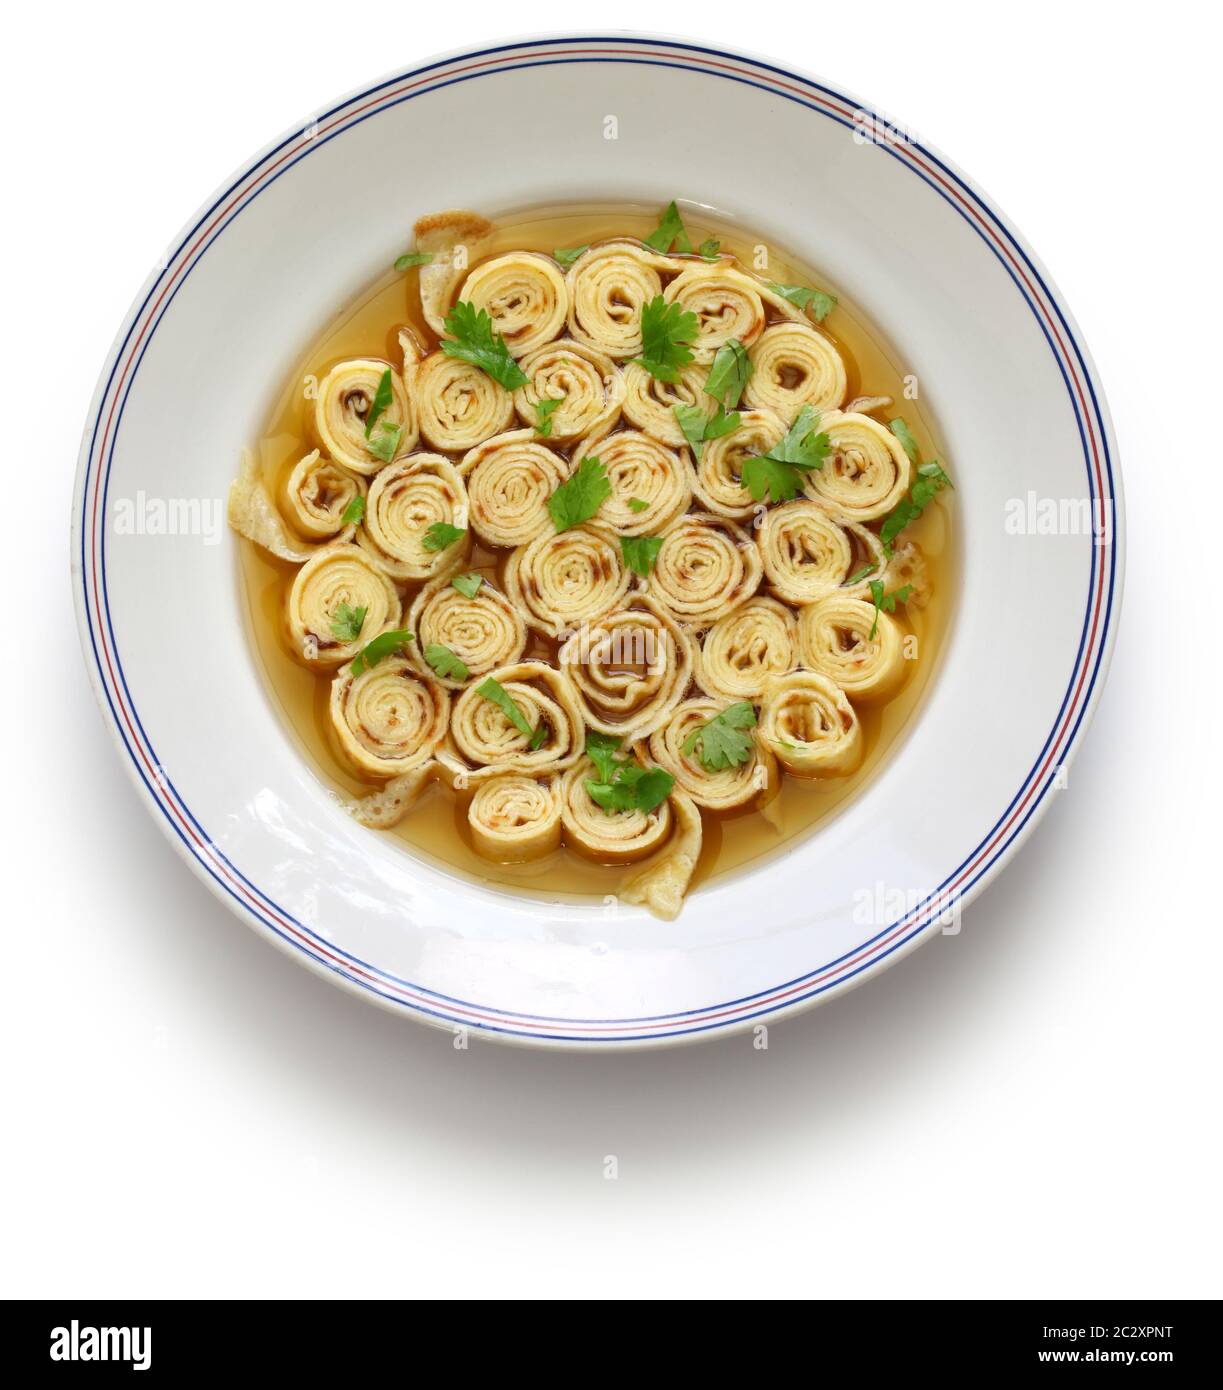 beef broth soup with sliced pancake Stock Photo